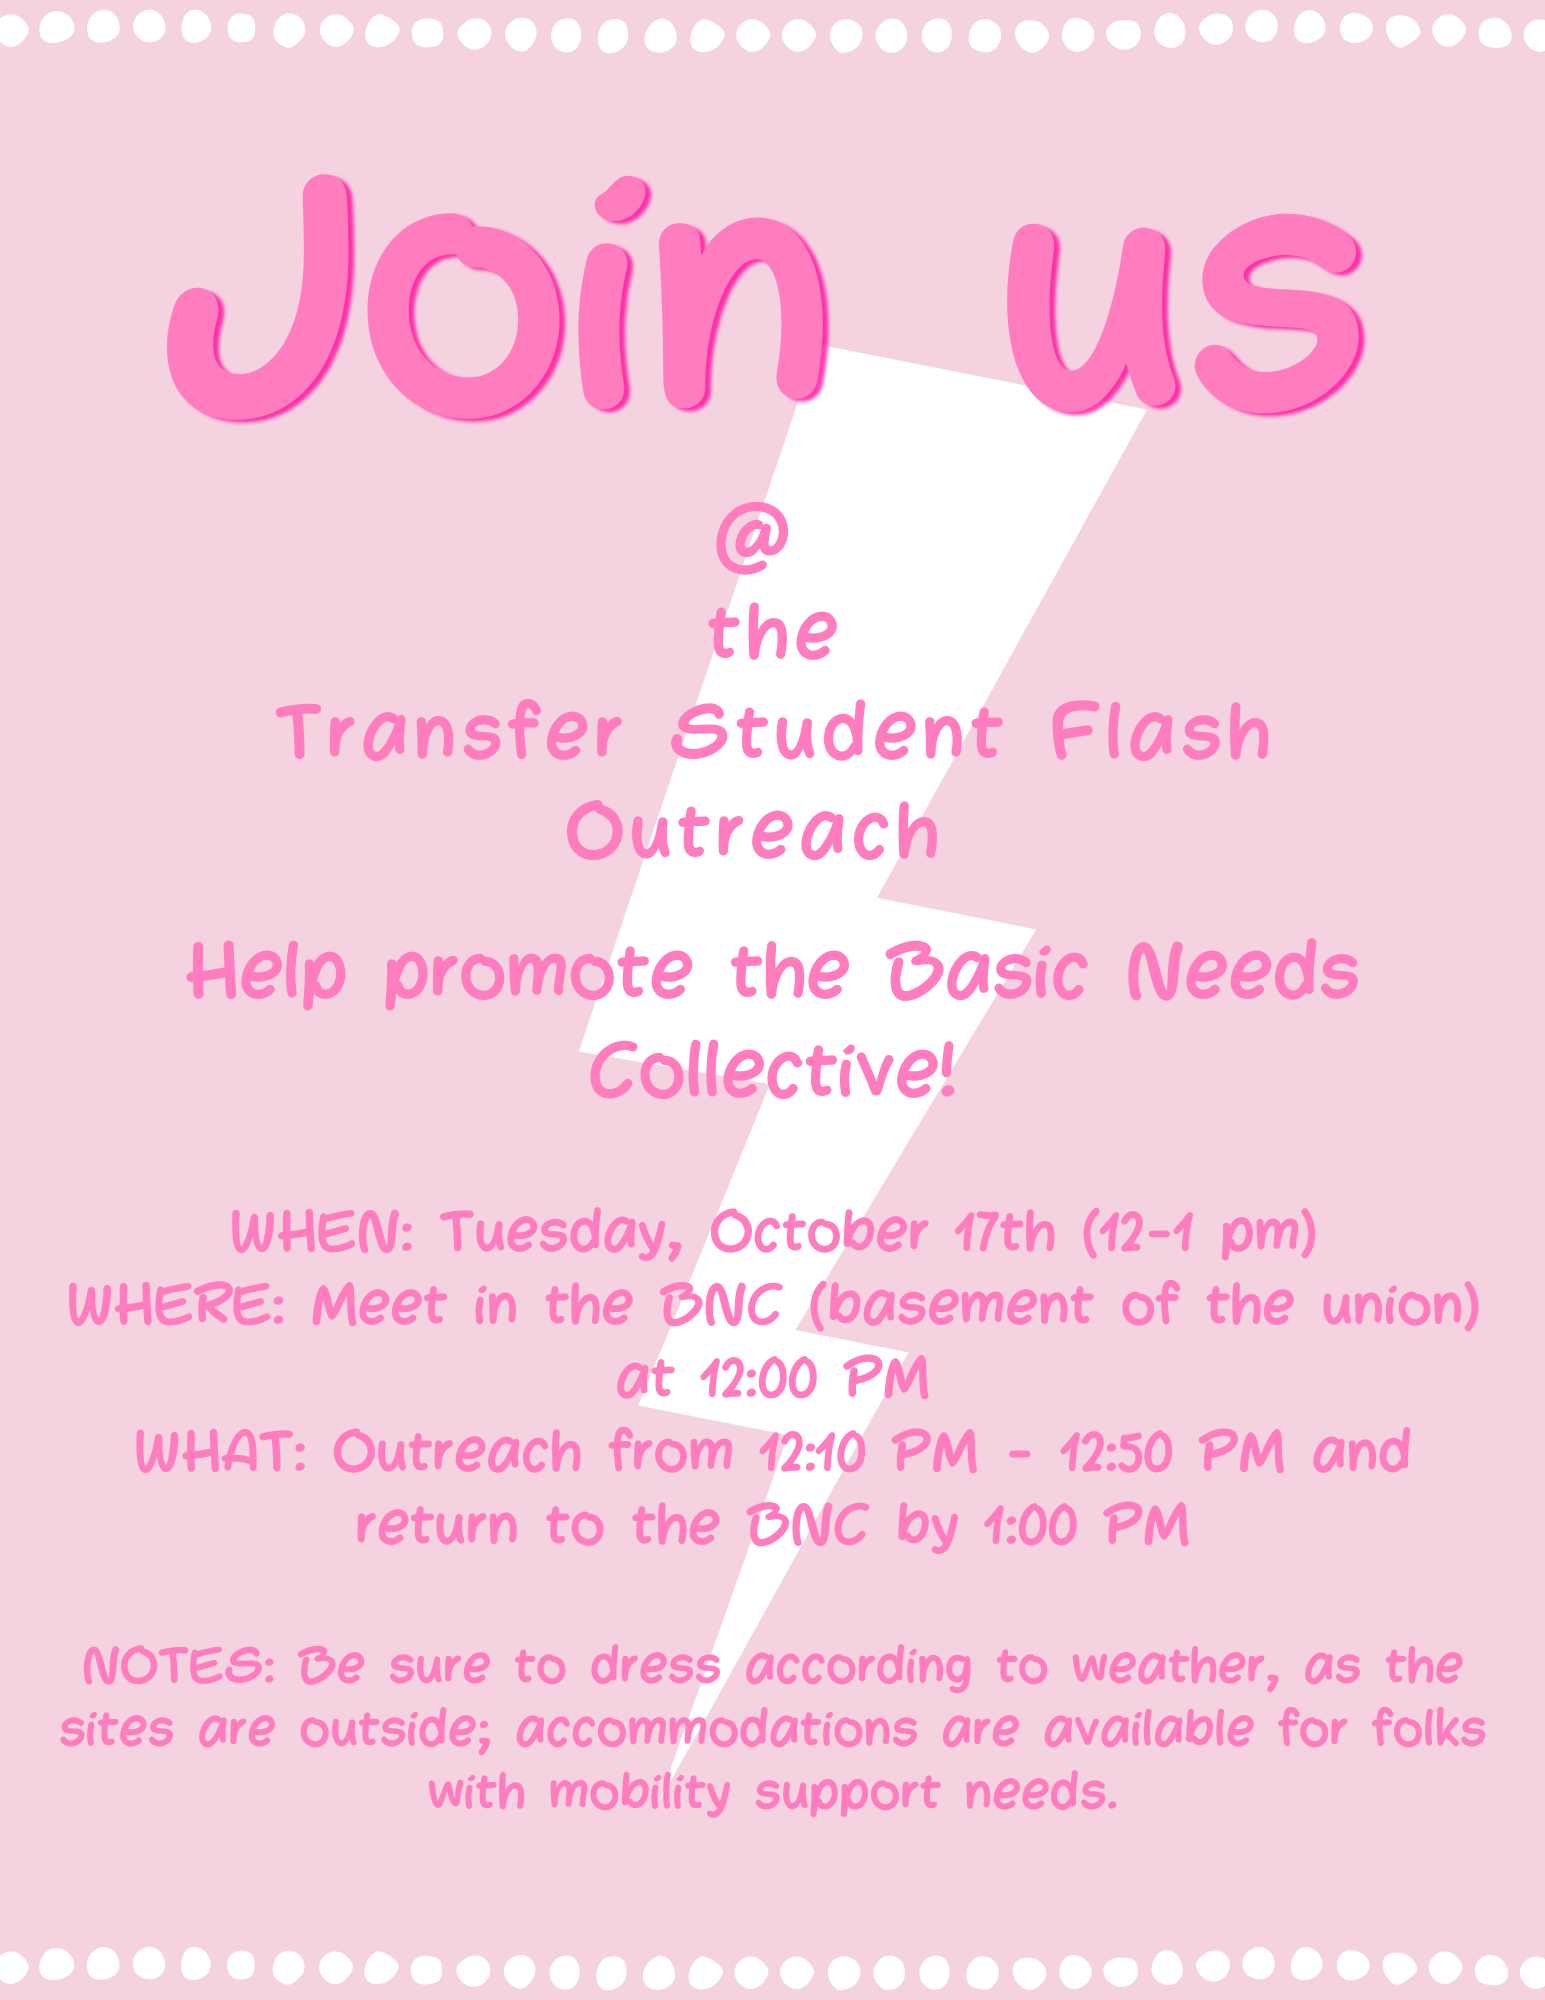 Basic Needs Collective Transfer Flash Outreach